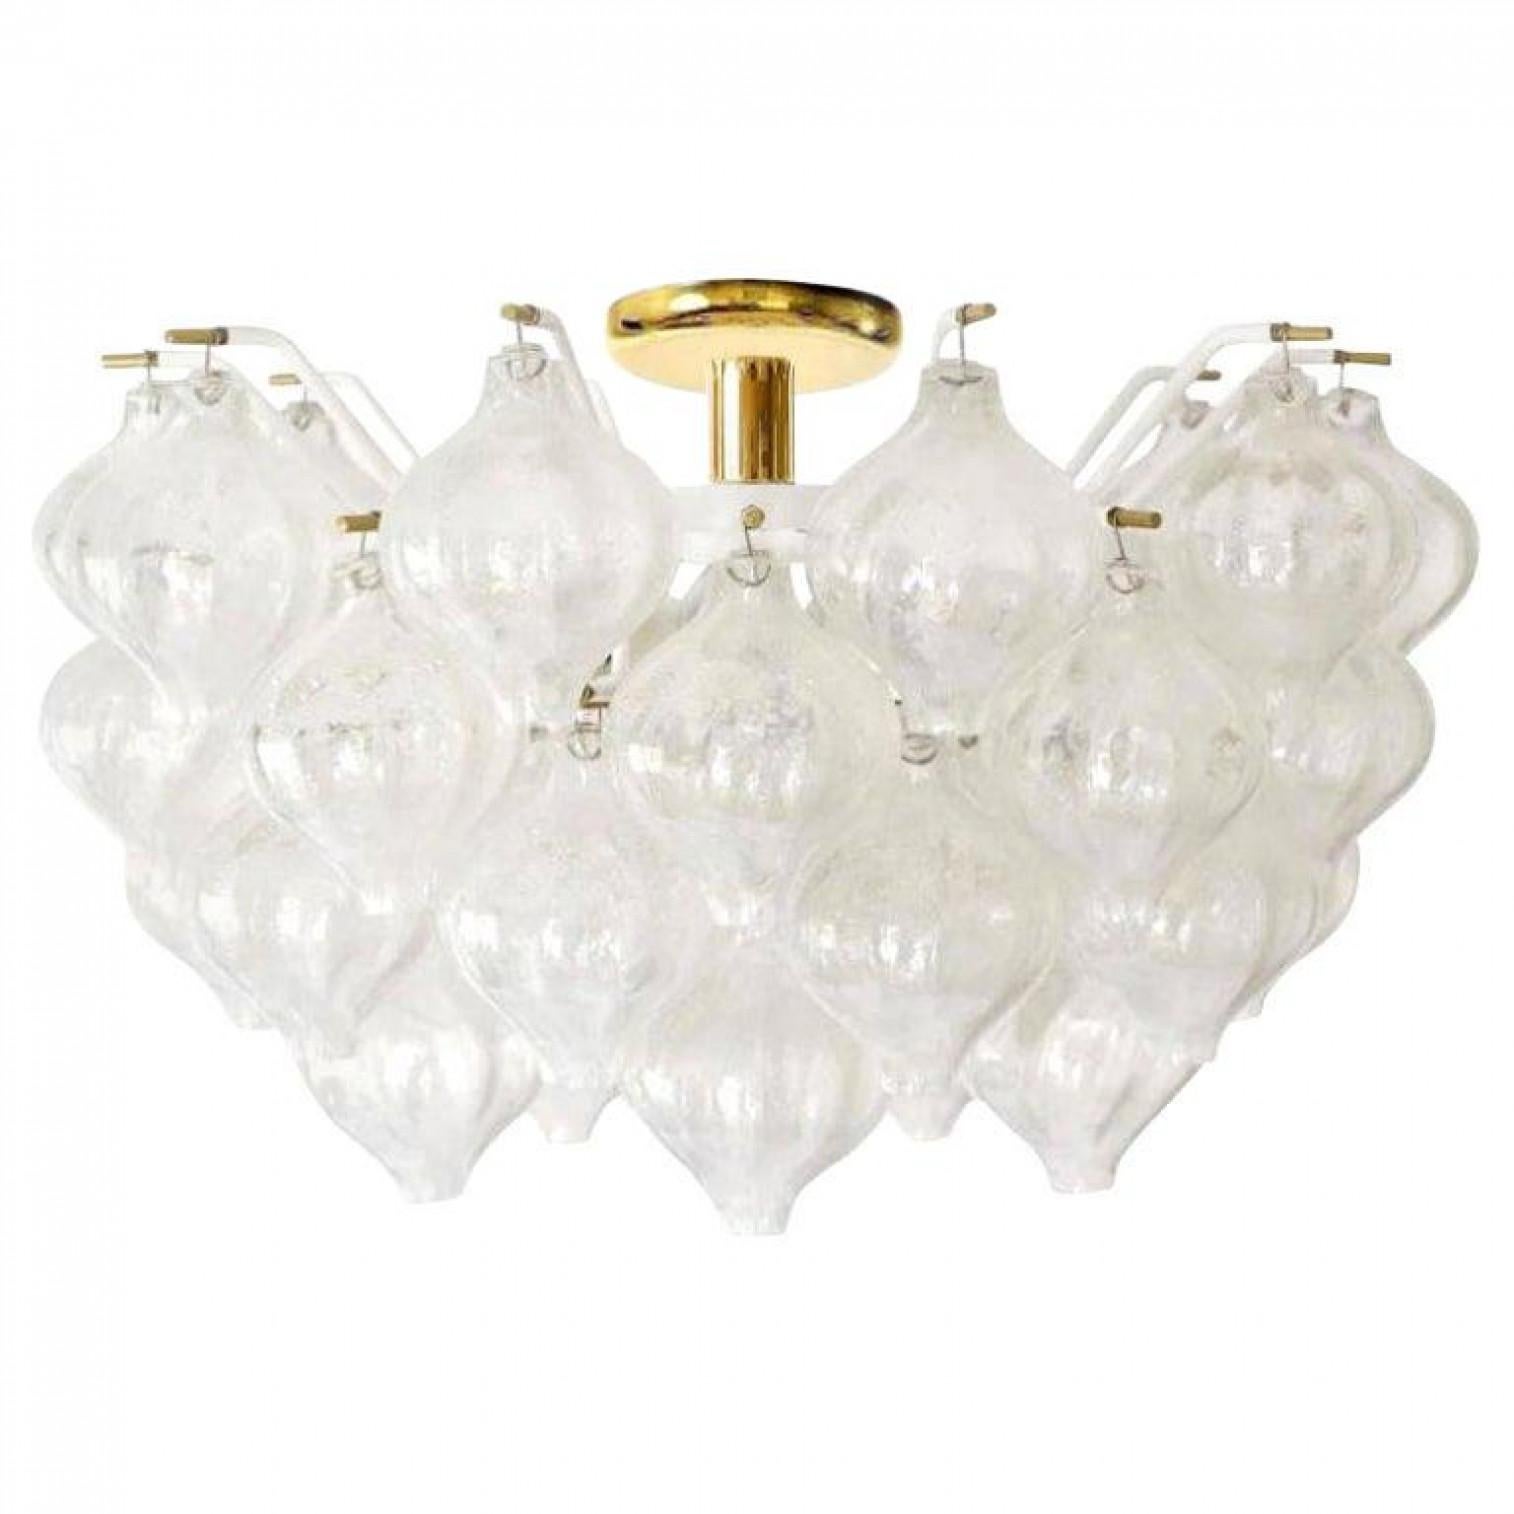 An exceptional 'Tulipan' flushmount chandelier by J.T. Kalmar, Austria, Vienna, manufactured in the midcentury, circa 1970 (late 1960s-early 1970s). With beautiful Murano Tulipan shaped hand blown bubble glasses. Several glasses are mounted with